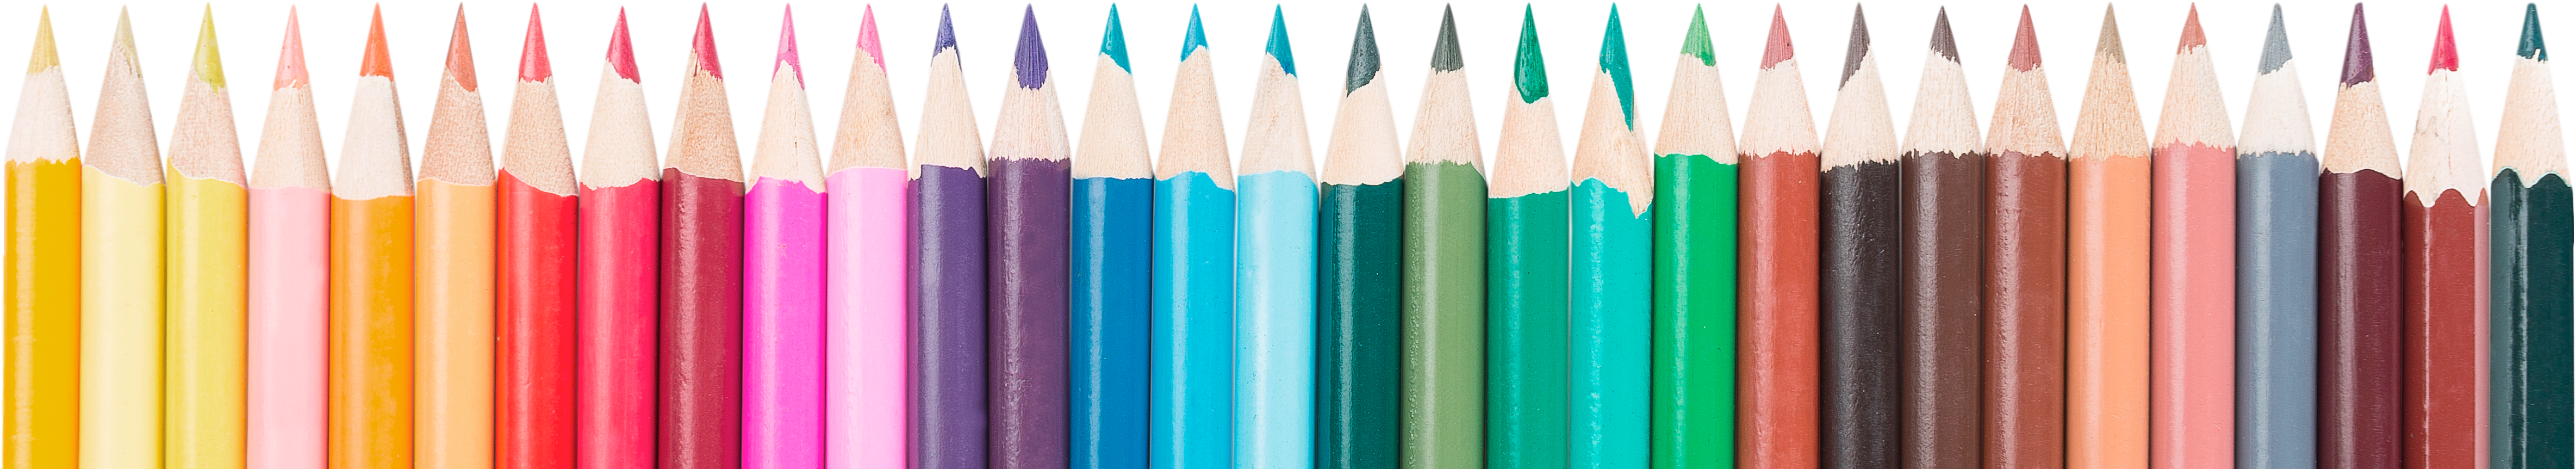 Row of Colorful Crayons - Isolated